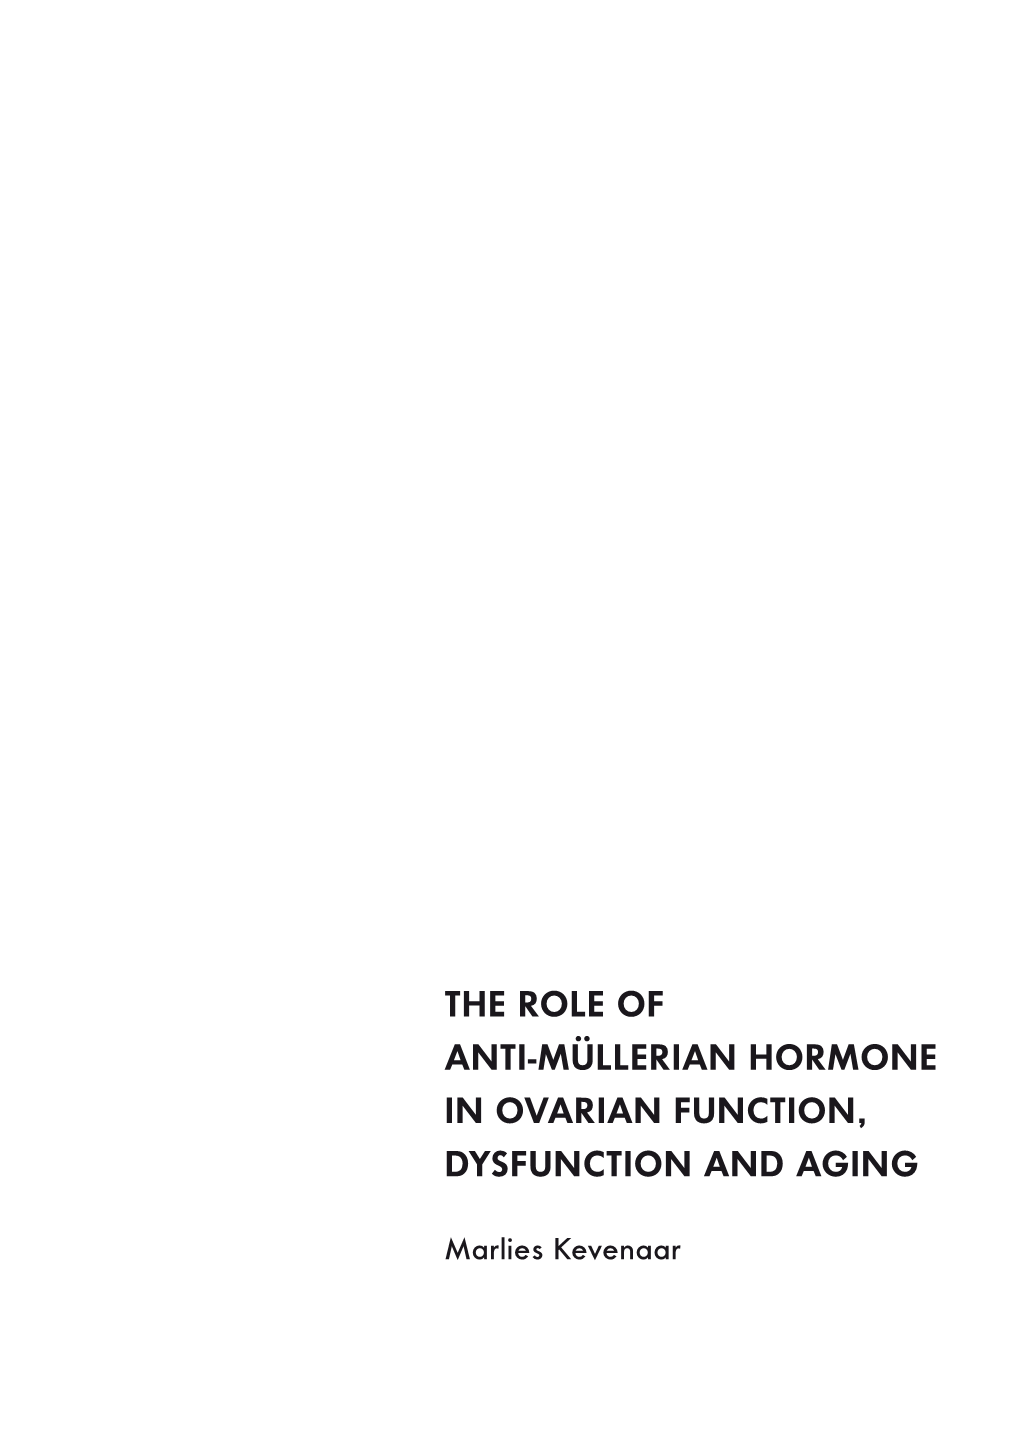 The Role of Anti-Müllerian Hormone in Ovarian Function, Dysfunction and Aging